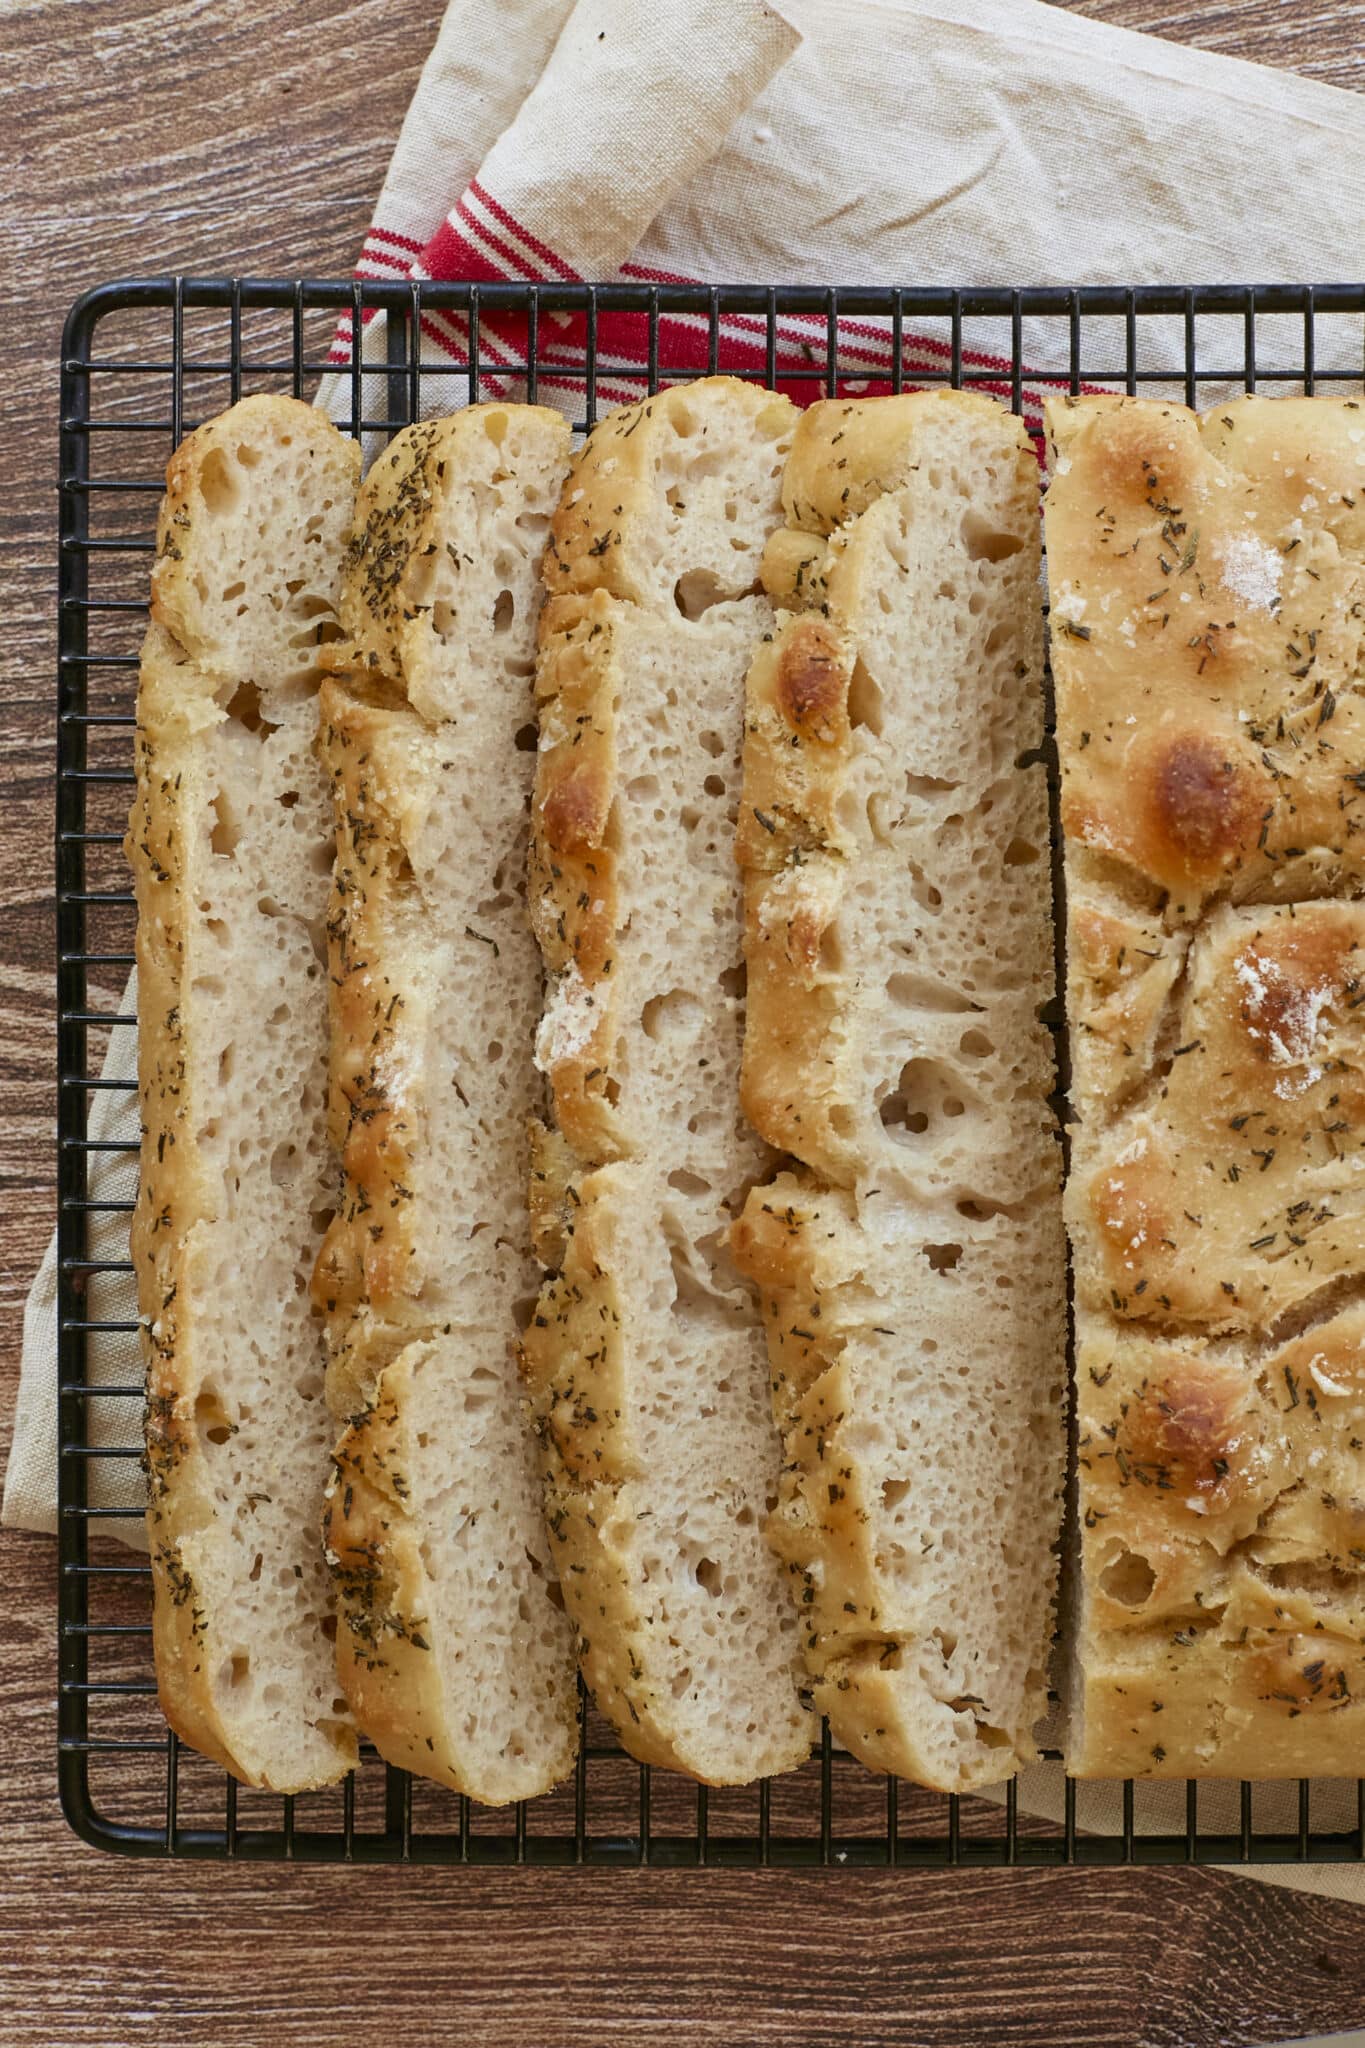 No-knead focaccia is sliced and cooling on the black wire rack. The close-up shot shows it bubbly crumb and golden, crispy exterior. 